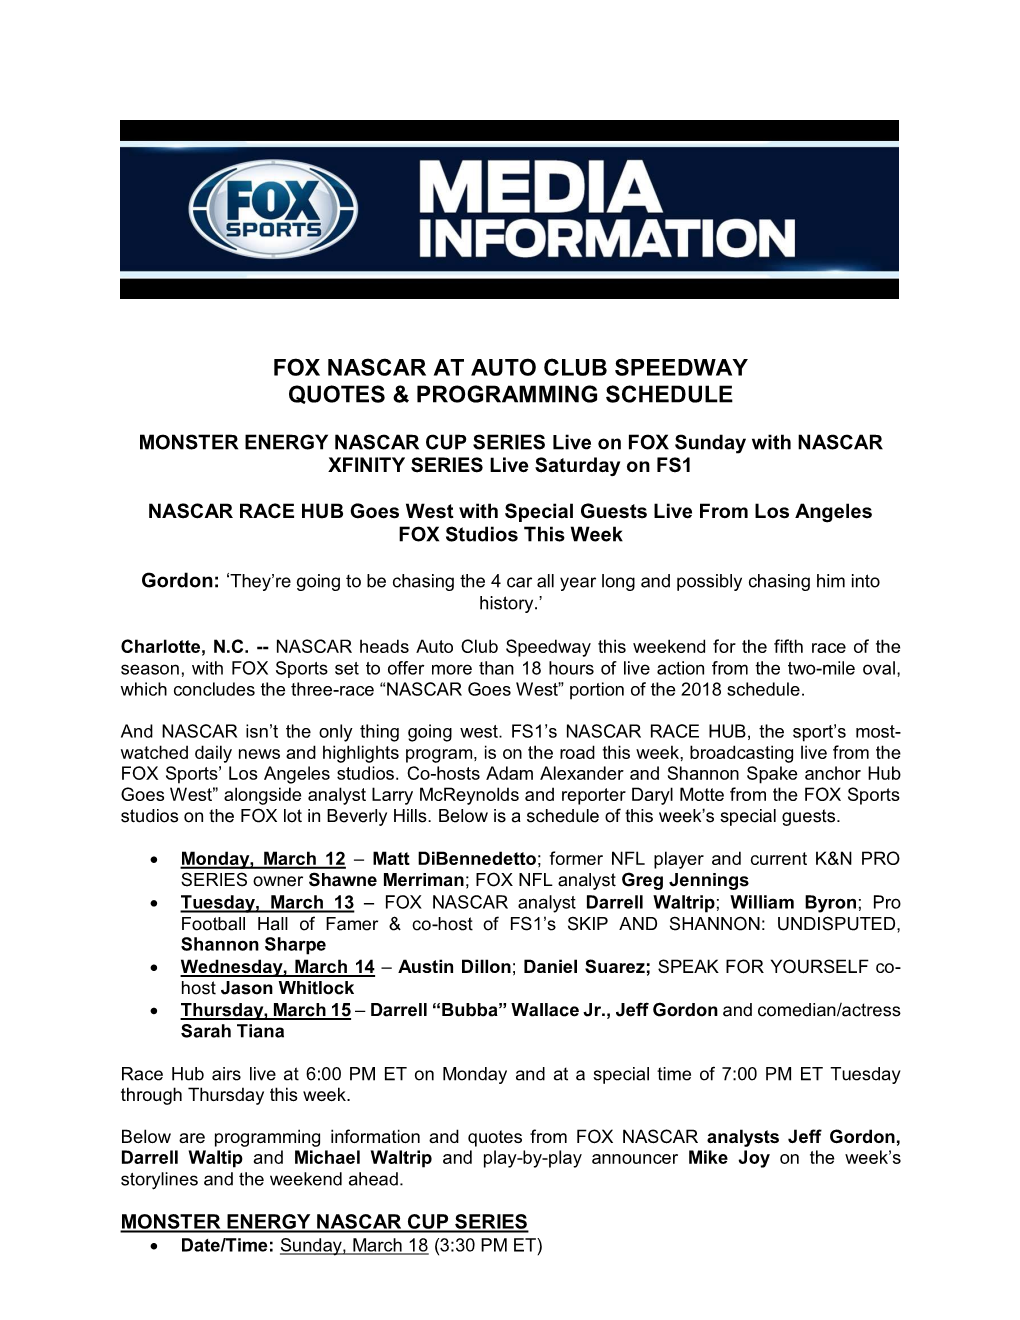 Fox Nascar at Auto Club Speedway Quotes & Programming Schedule